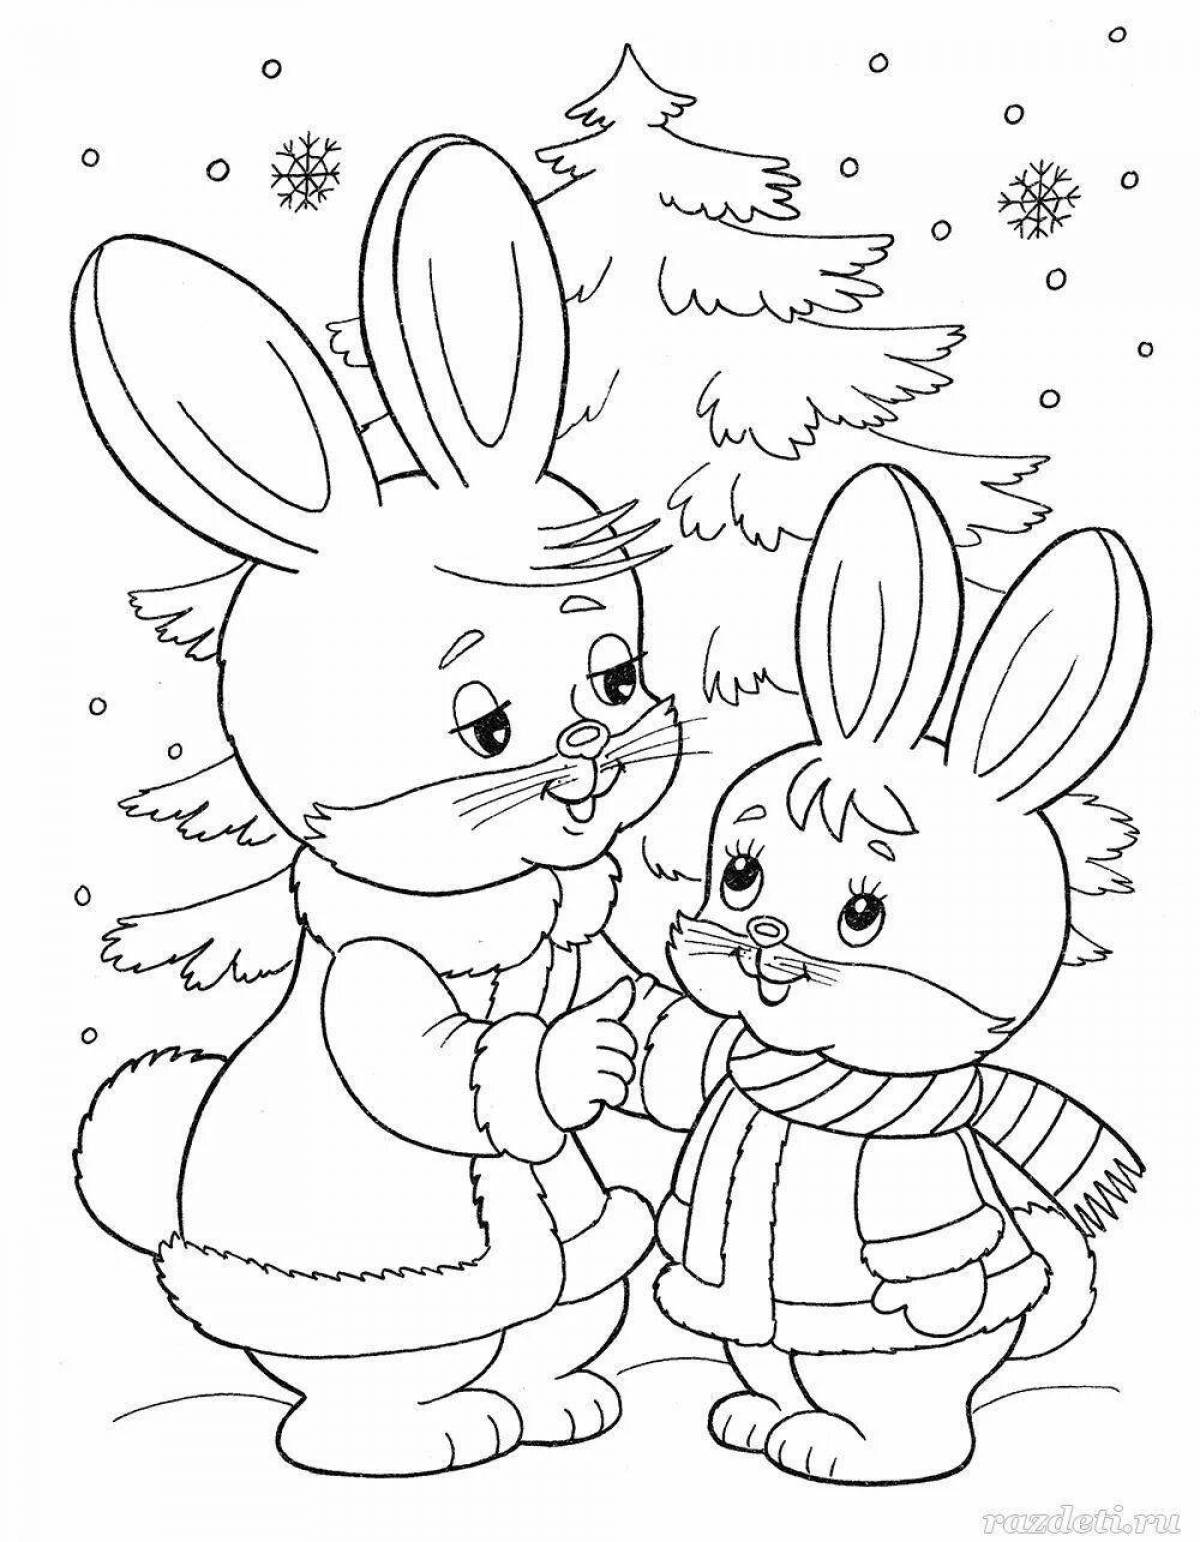 Gorgeous animal coloring book in winter